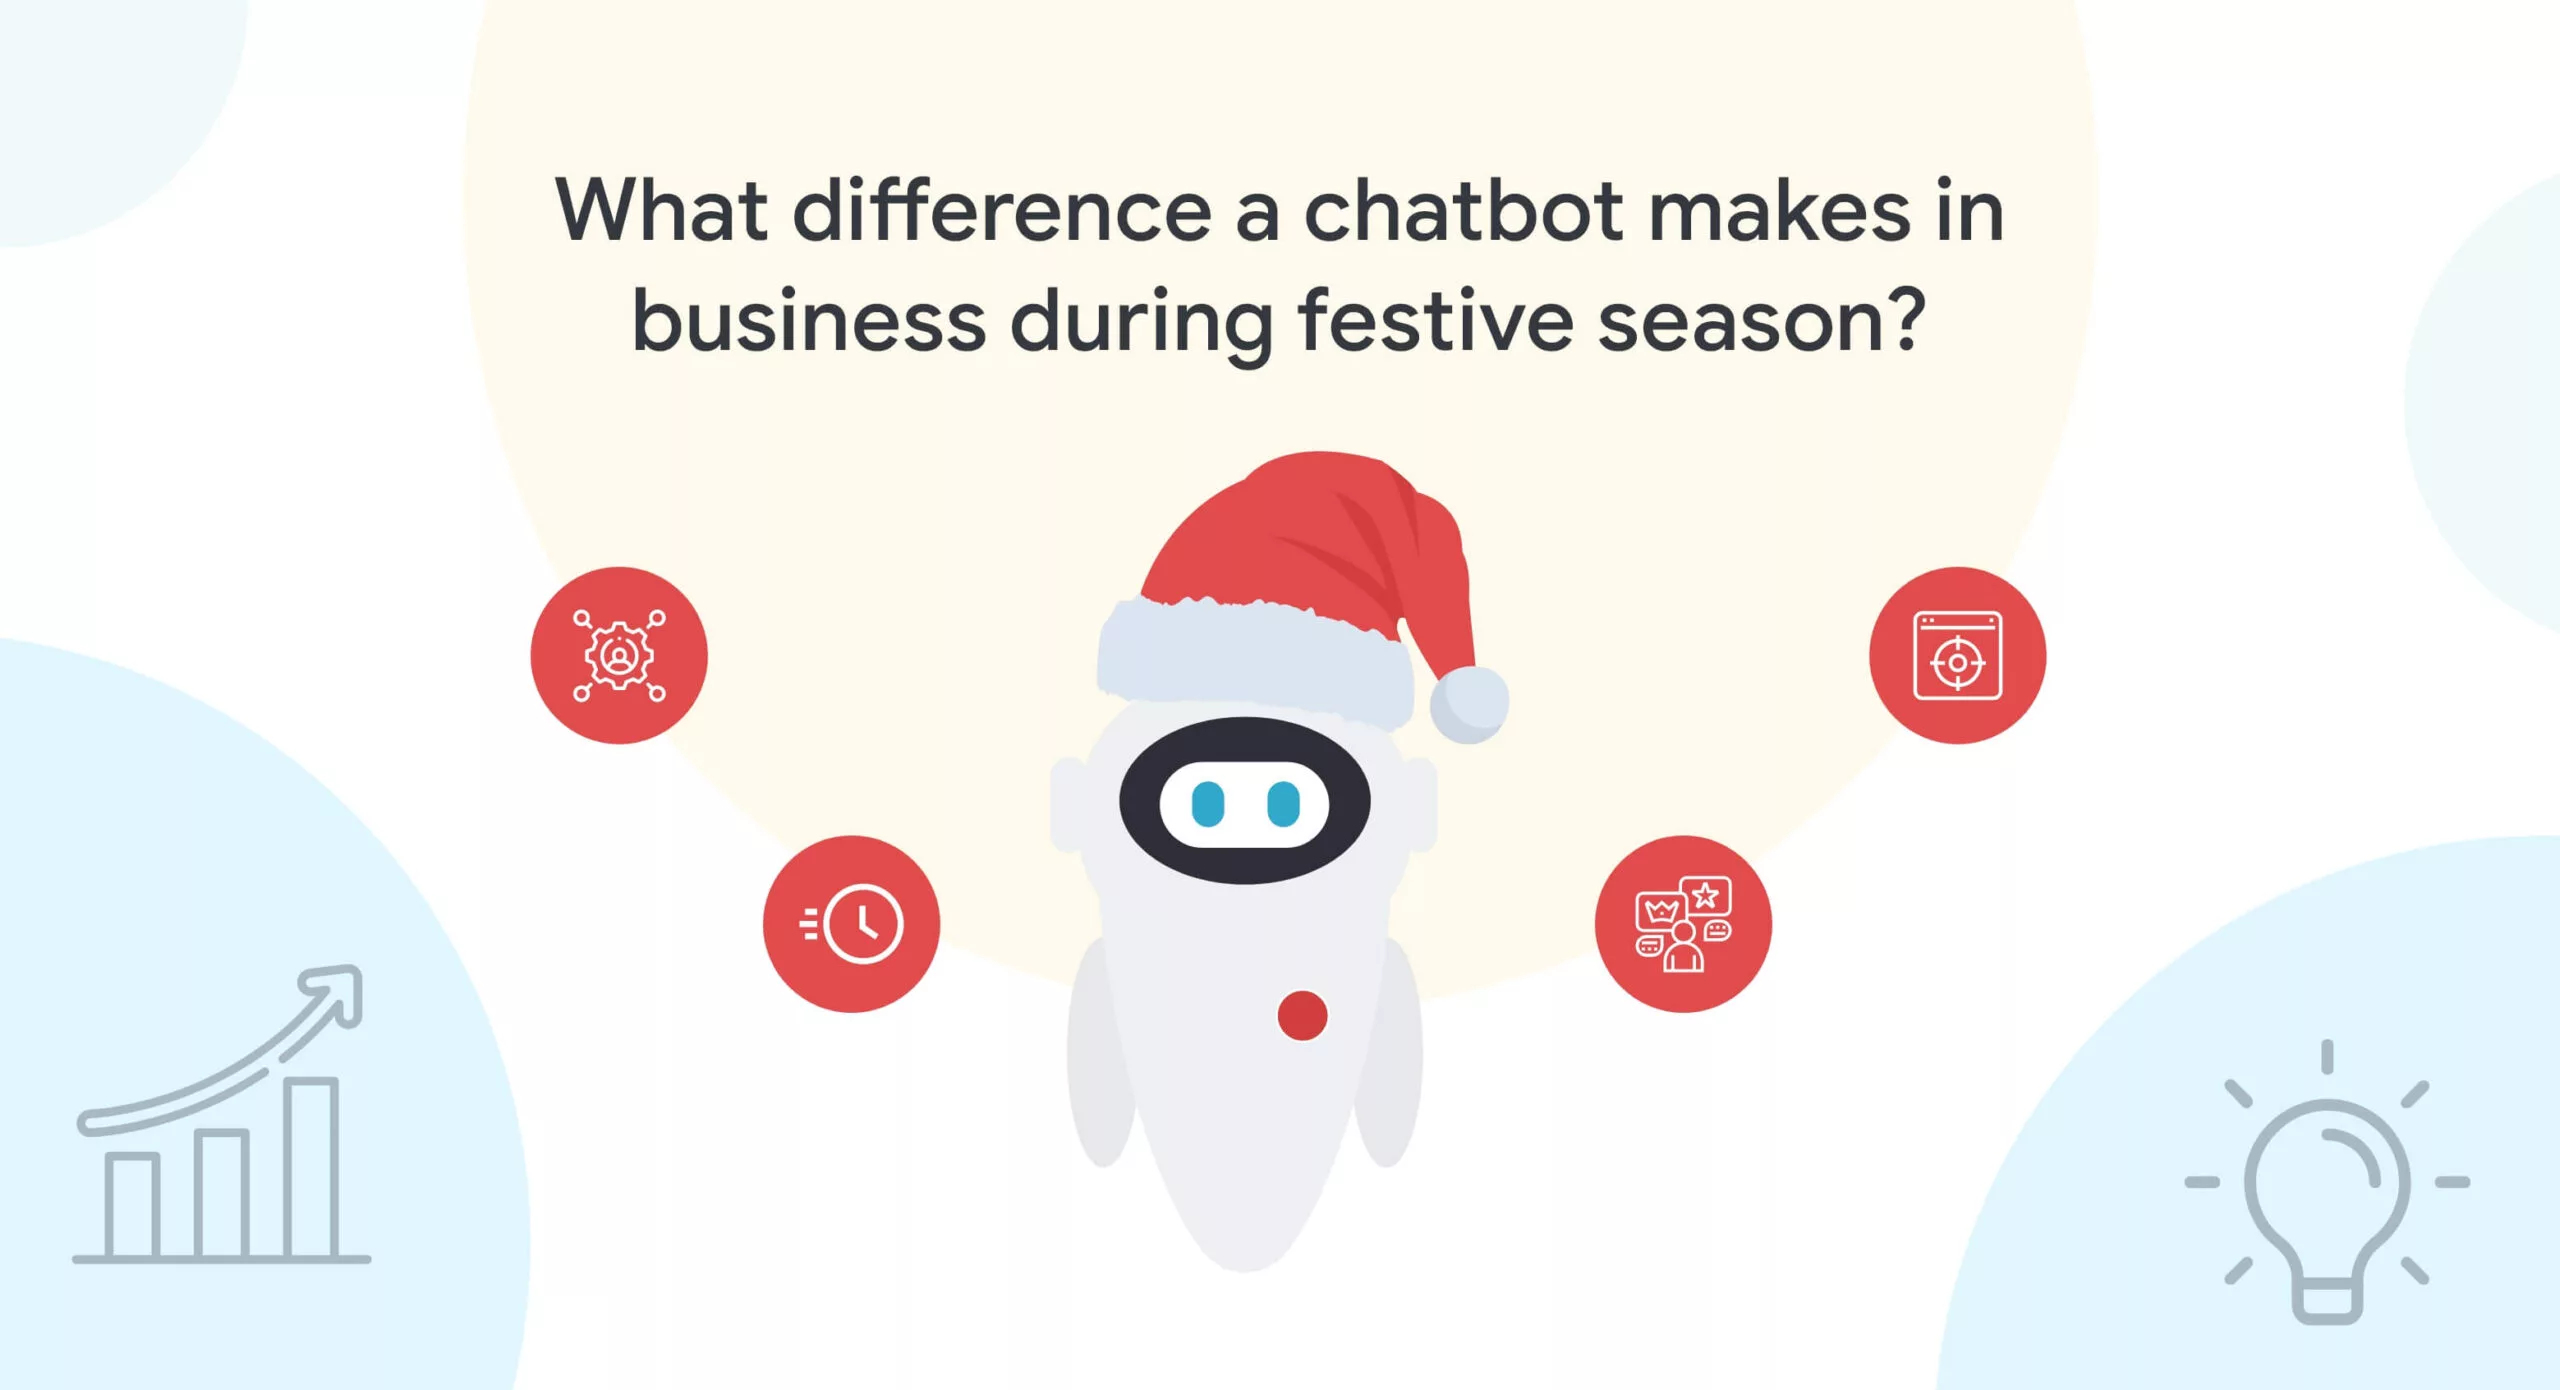 What difference a chatbot makes in business during festive season